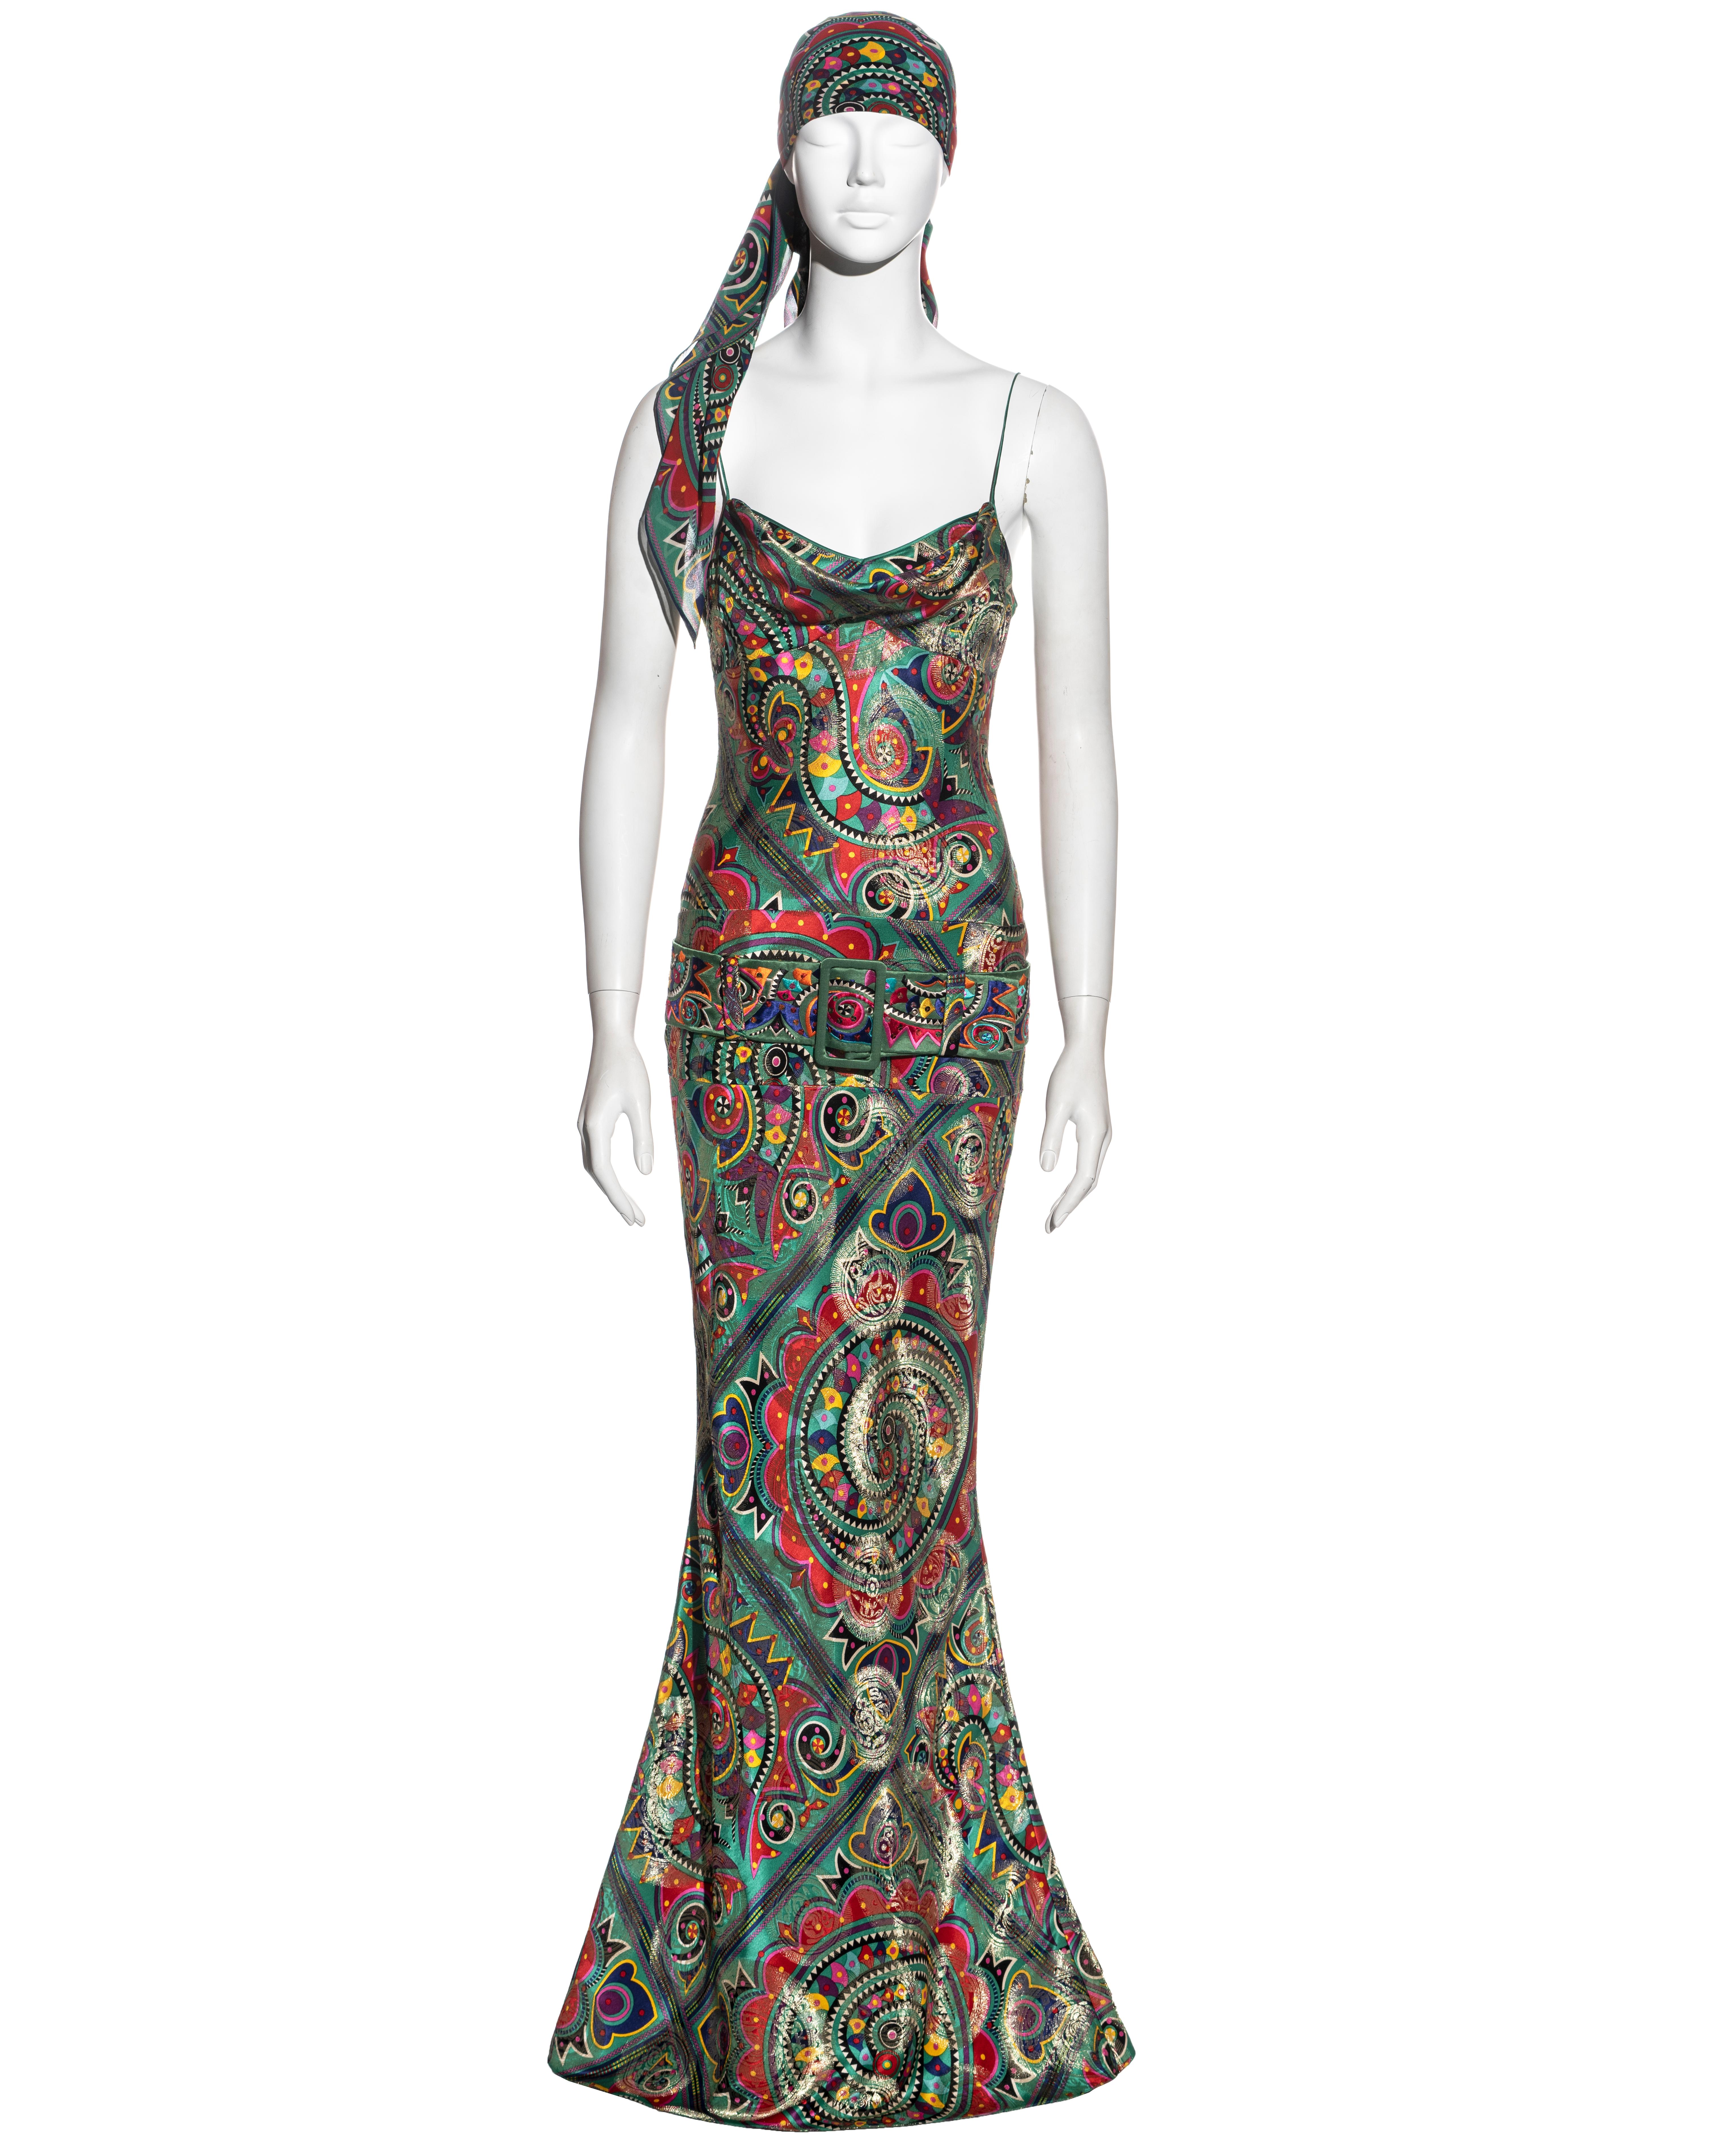 ▪ John Galliano evening dress 
▪ Sold by One of a Kind Archive
▪ Multicoloured silk jacquard with metallic metal thread 
▪ Cowl neck 
▪ Spaghetti straps 
▪ Embroidered belt at the lower waist
▪ Sold with matching silk chiffon headscarf 
▪ FR 36 - UK